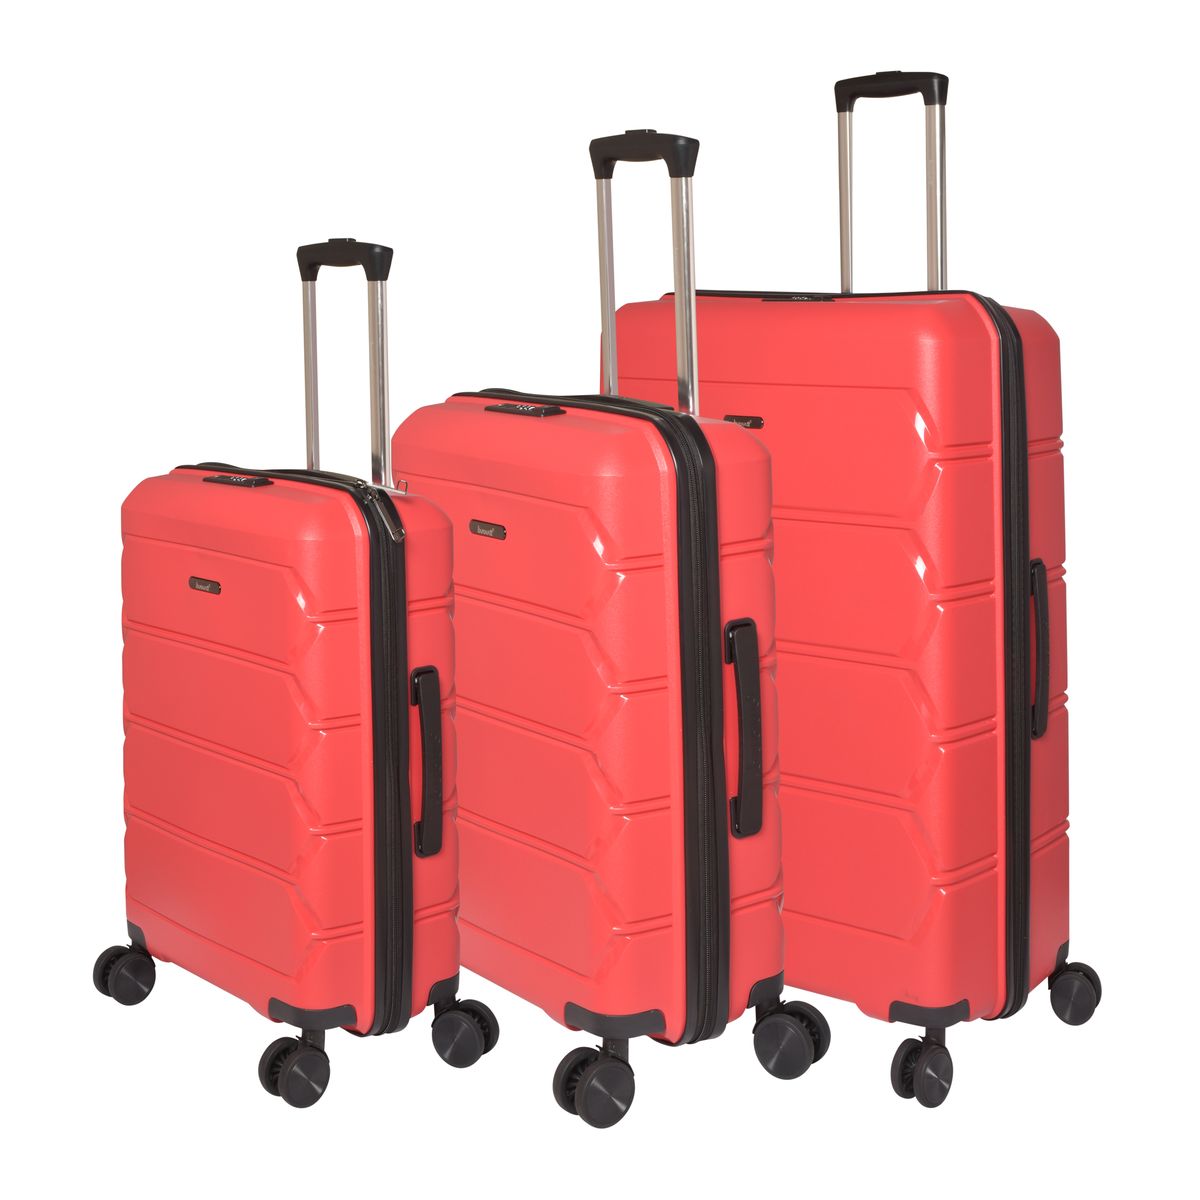 Bubule -3 Piece Hard Outer Shell Luggage Set - PPL14 55/65 - 75cm - Red ...